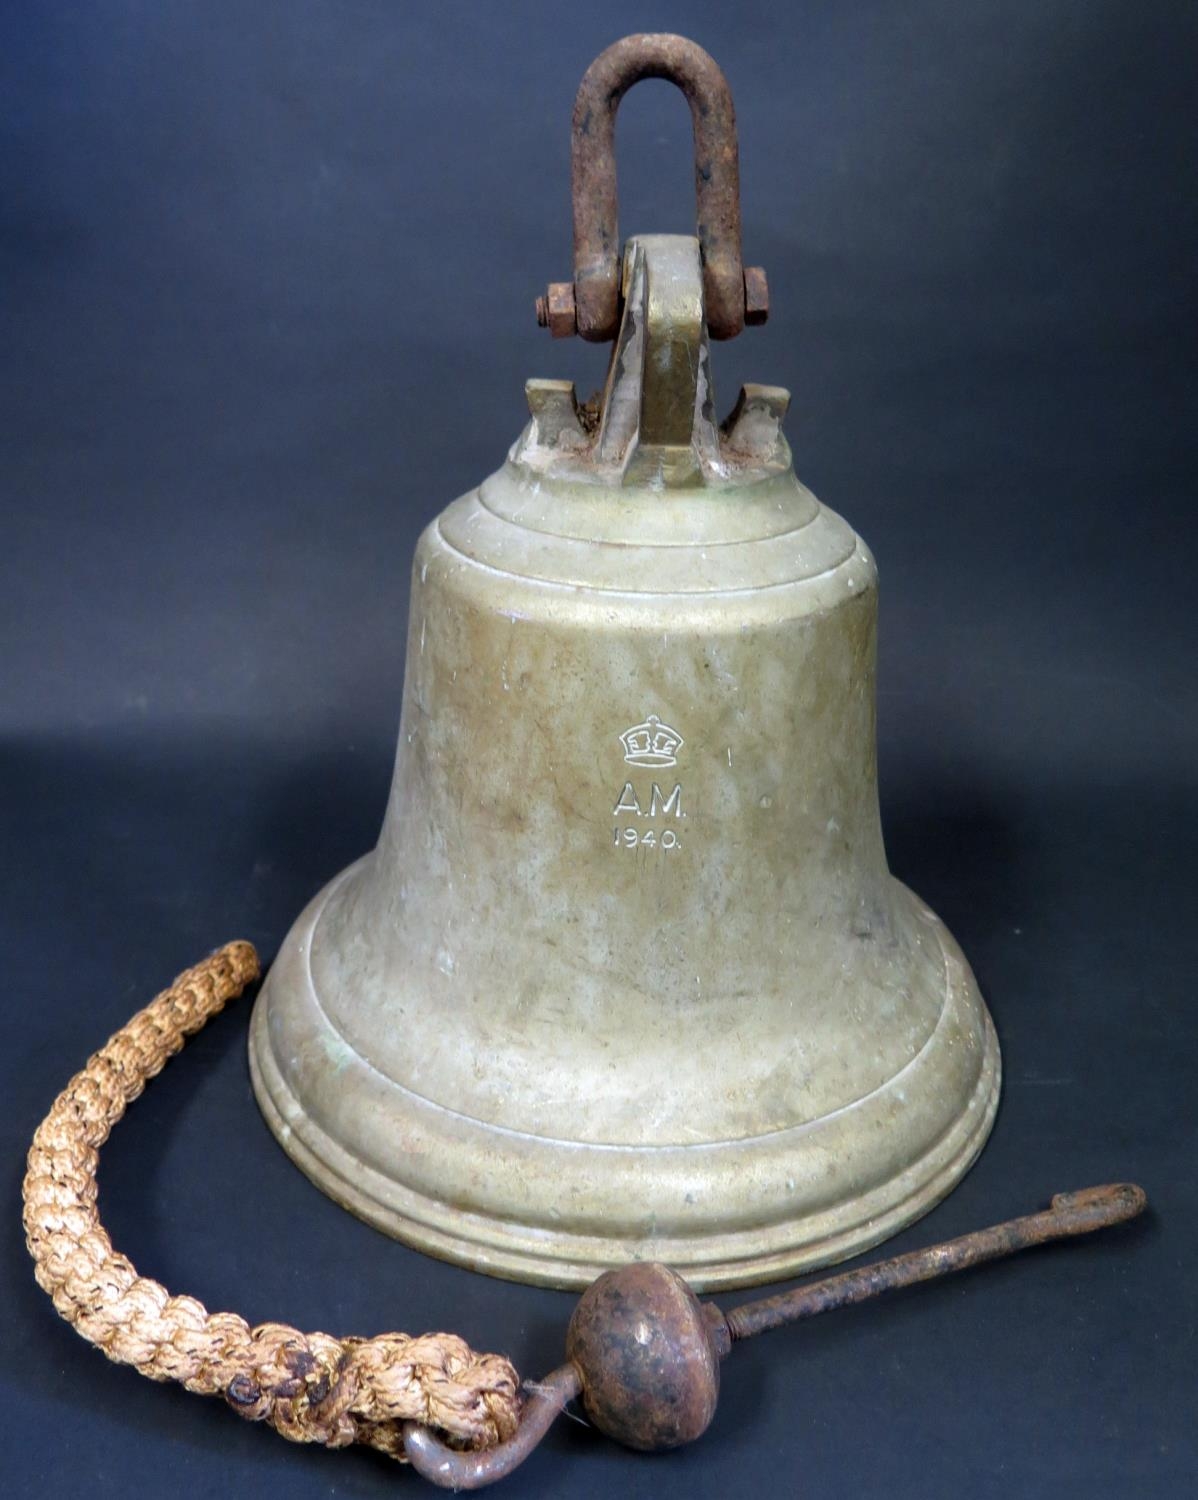 A WWII Air Ministry Scramble Bell, marked A.M. 1940 and believed